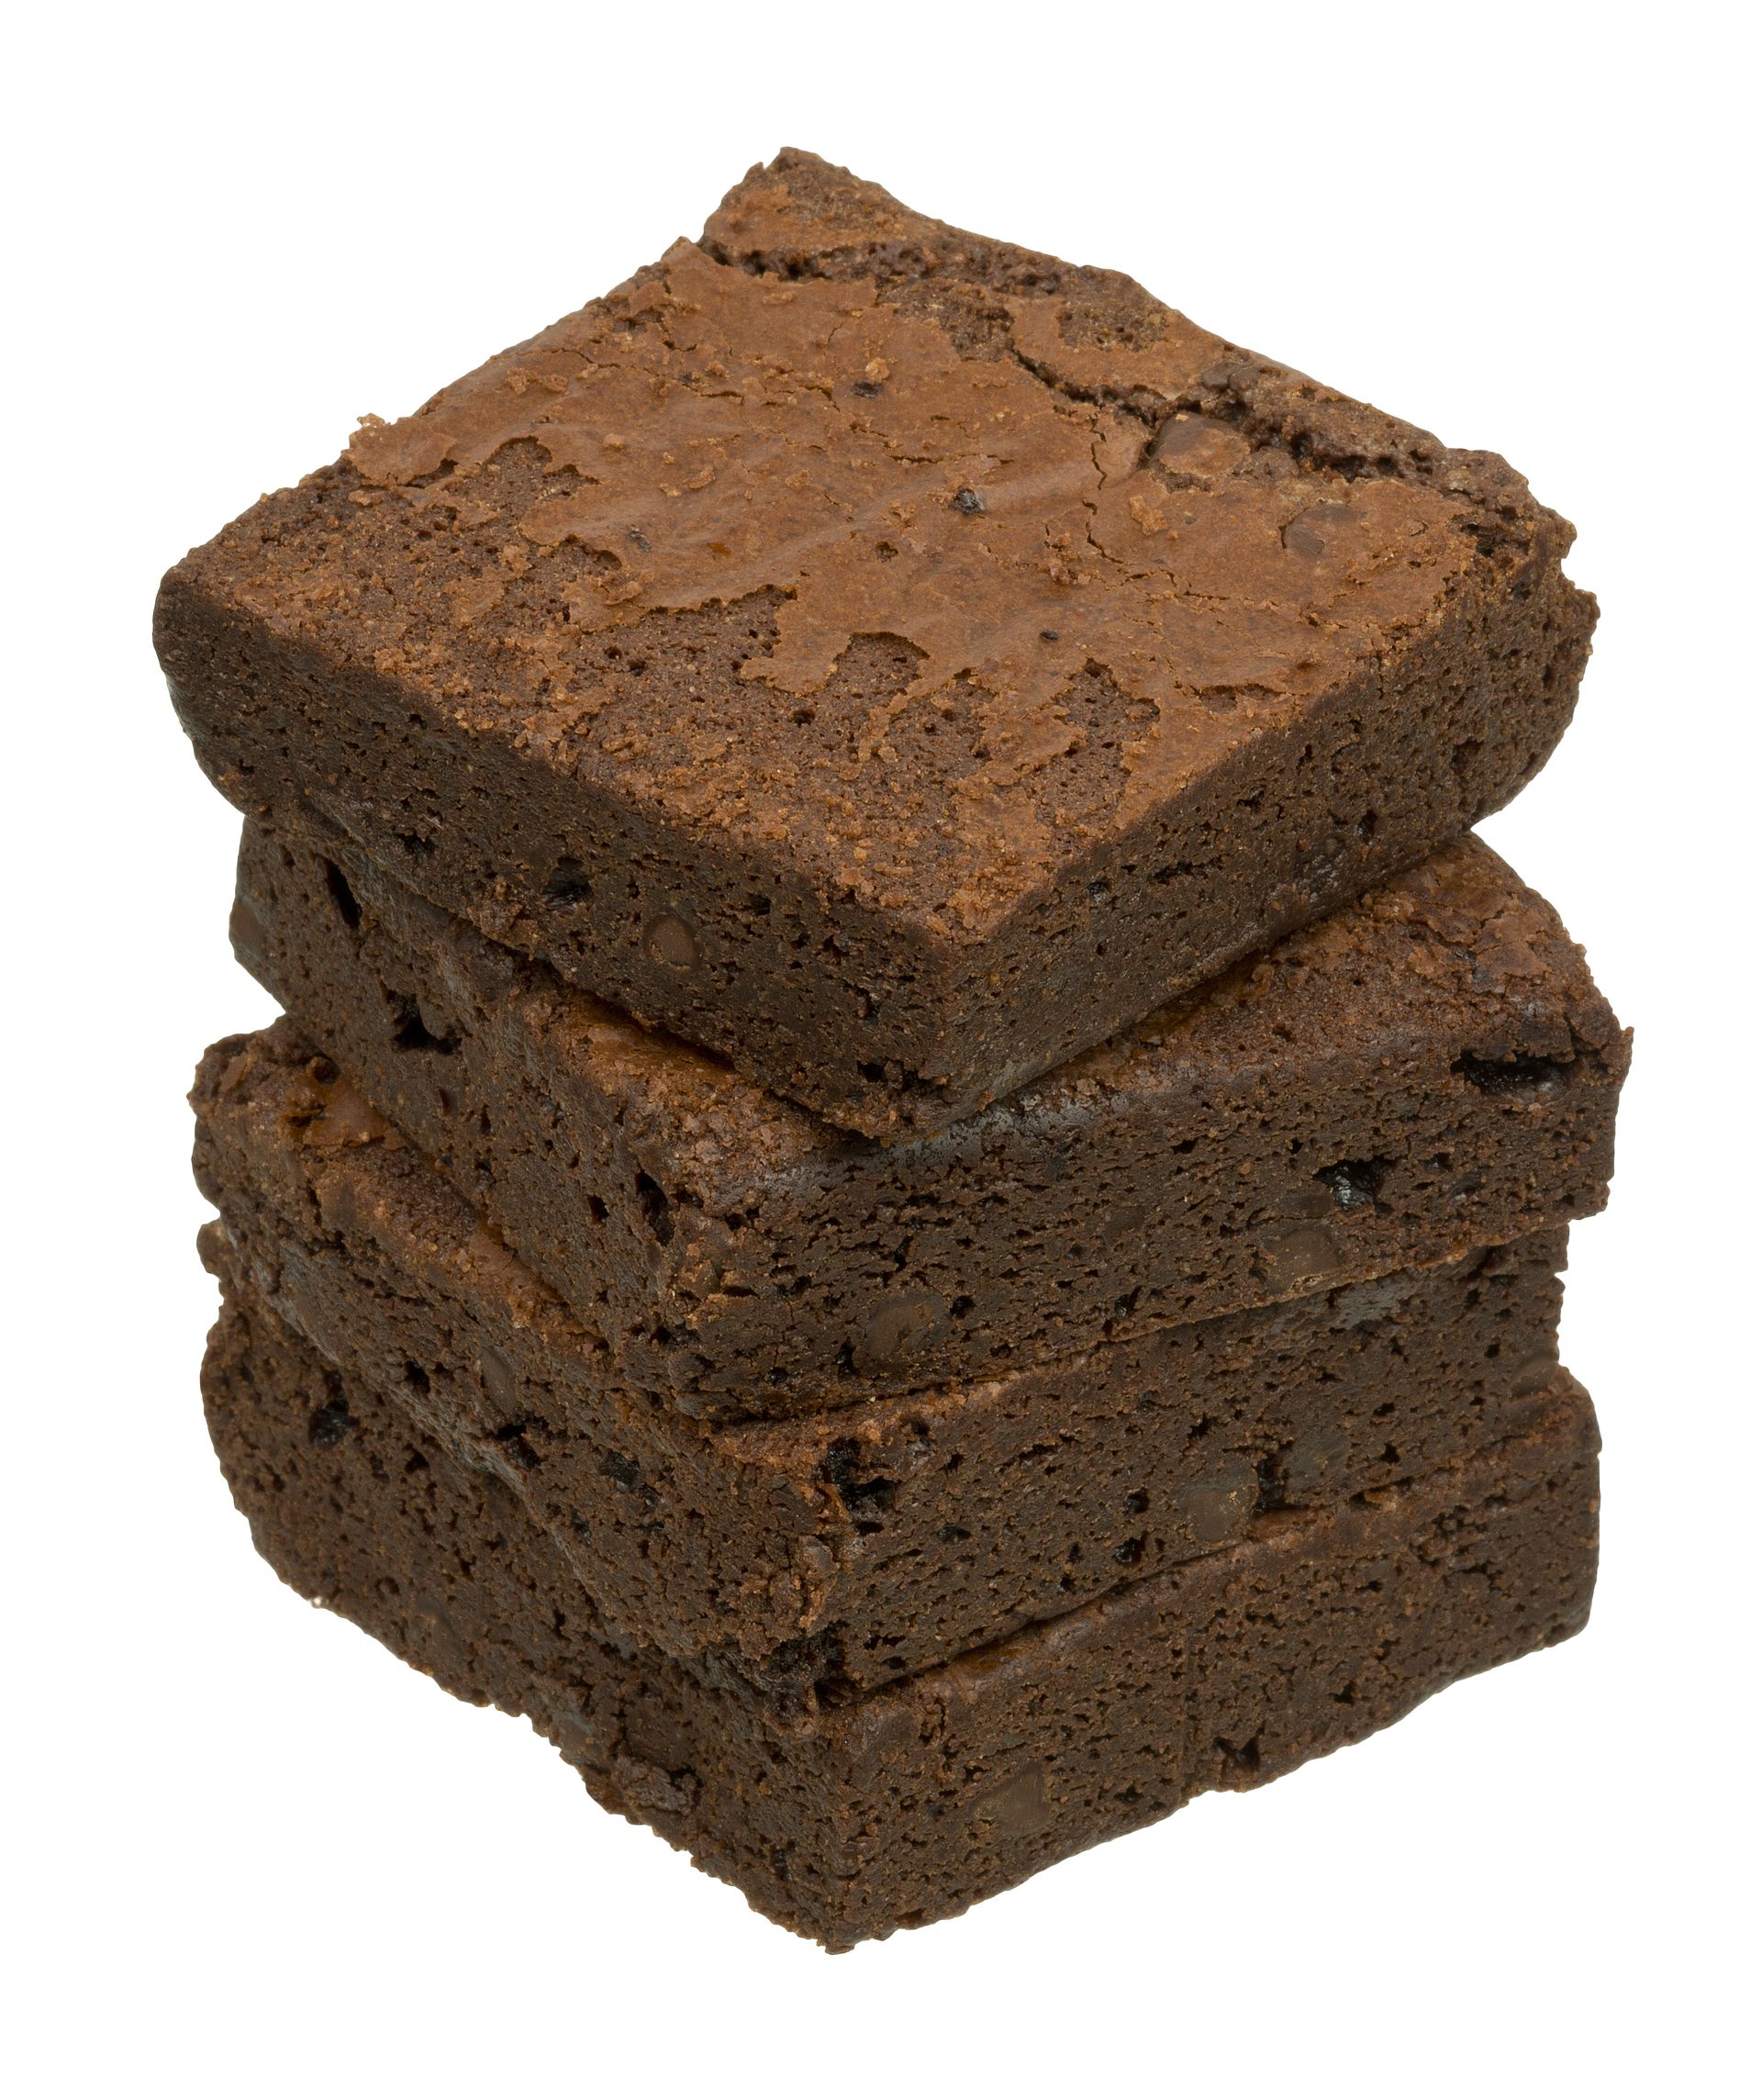 A stack of Dancing-Deer-brand brownies, bought at a supermarket in Brooklyn, NY.